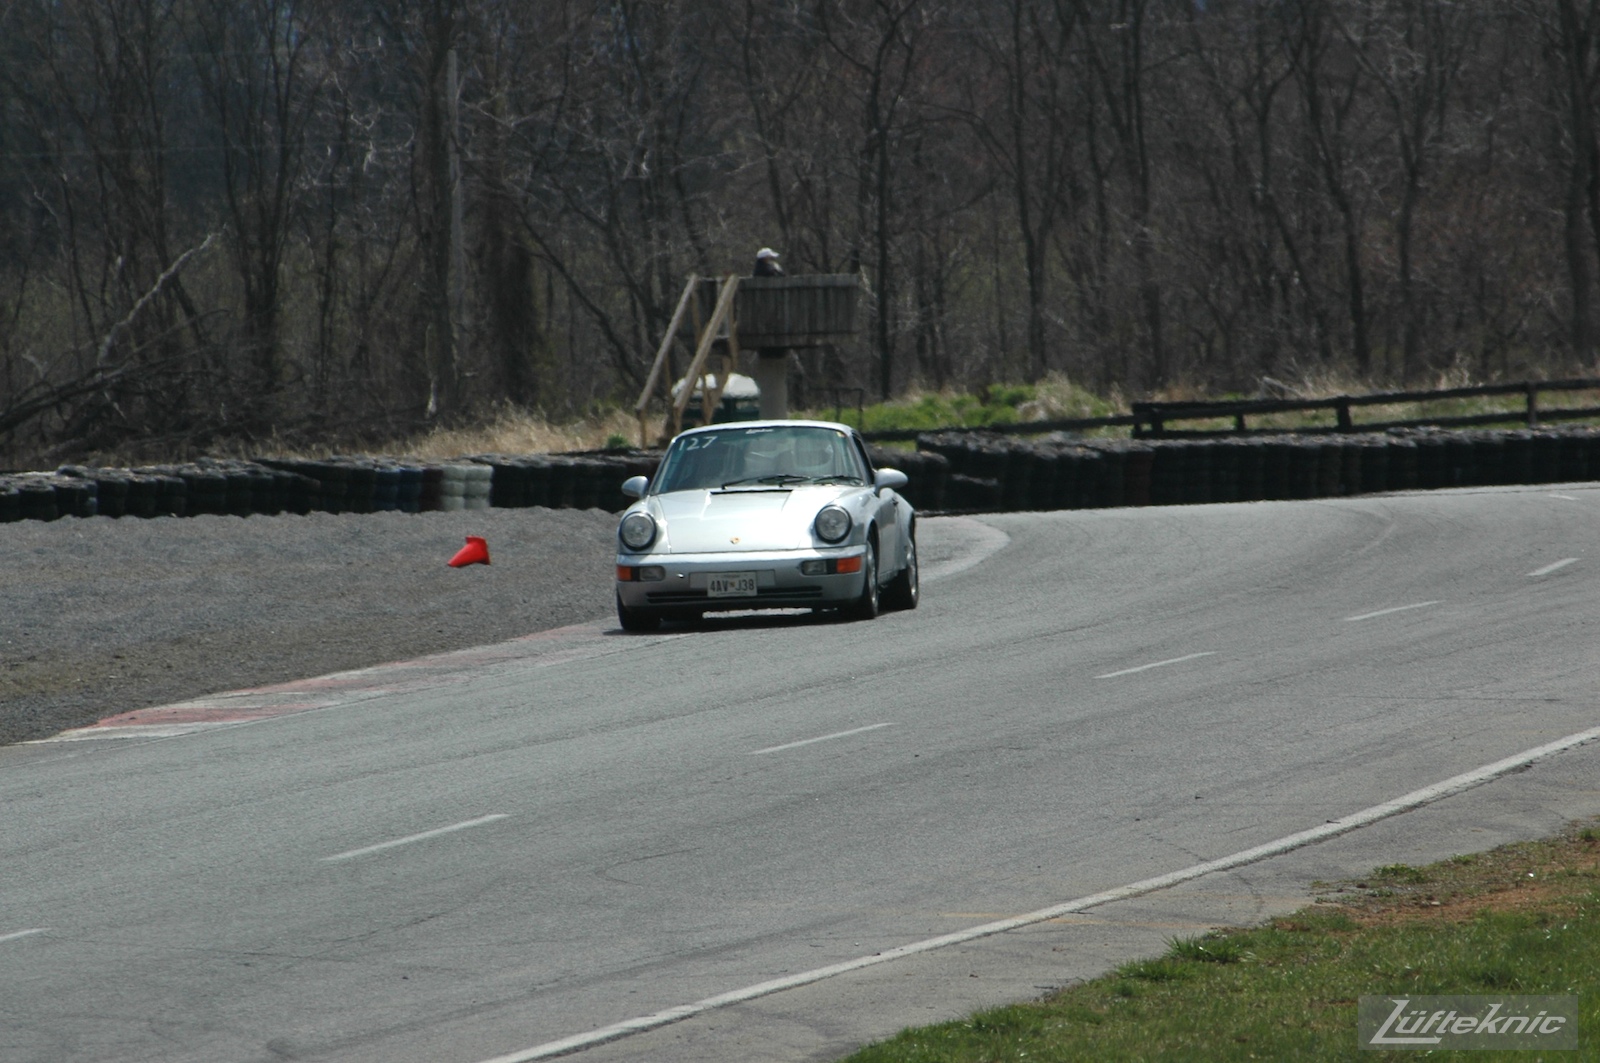 The 964 RS America on track for the first time after the accident, on a straightway.